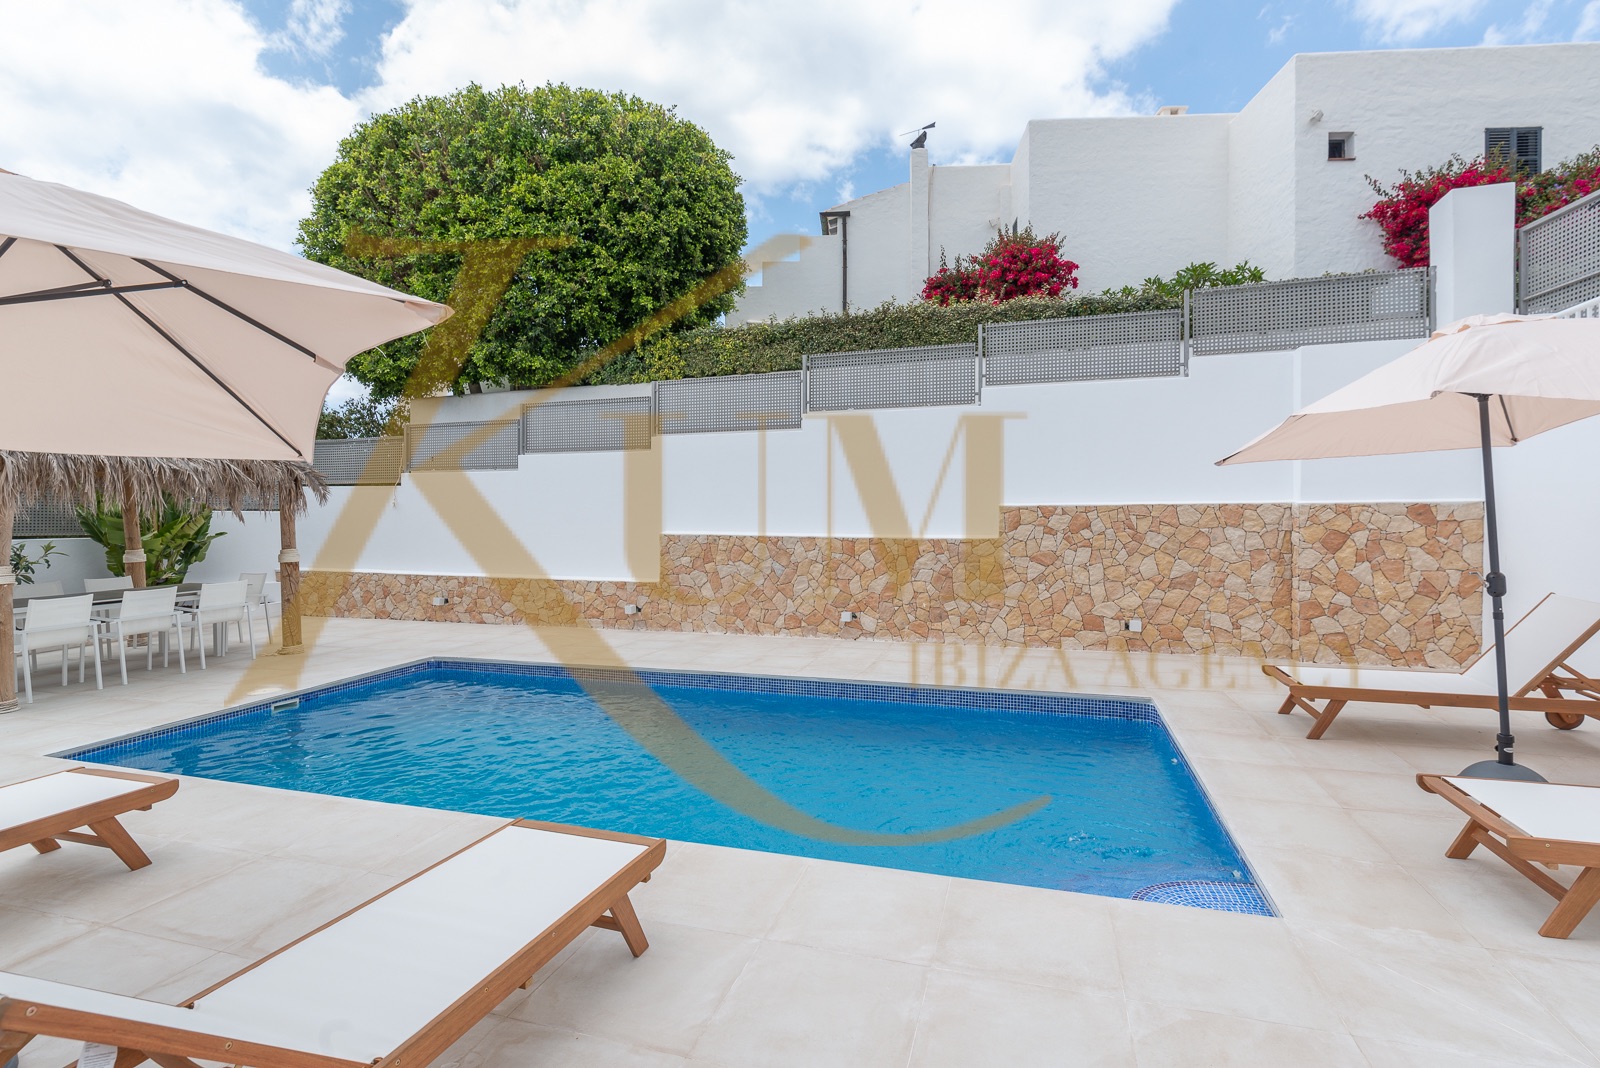 Beautiful house with private pool and guest apartment for rent.